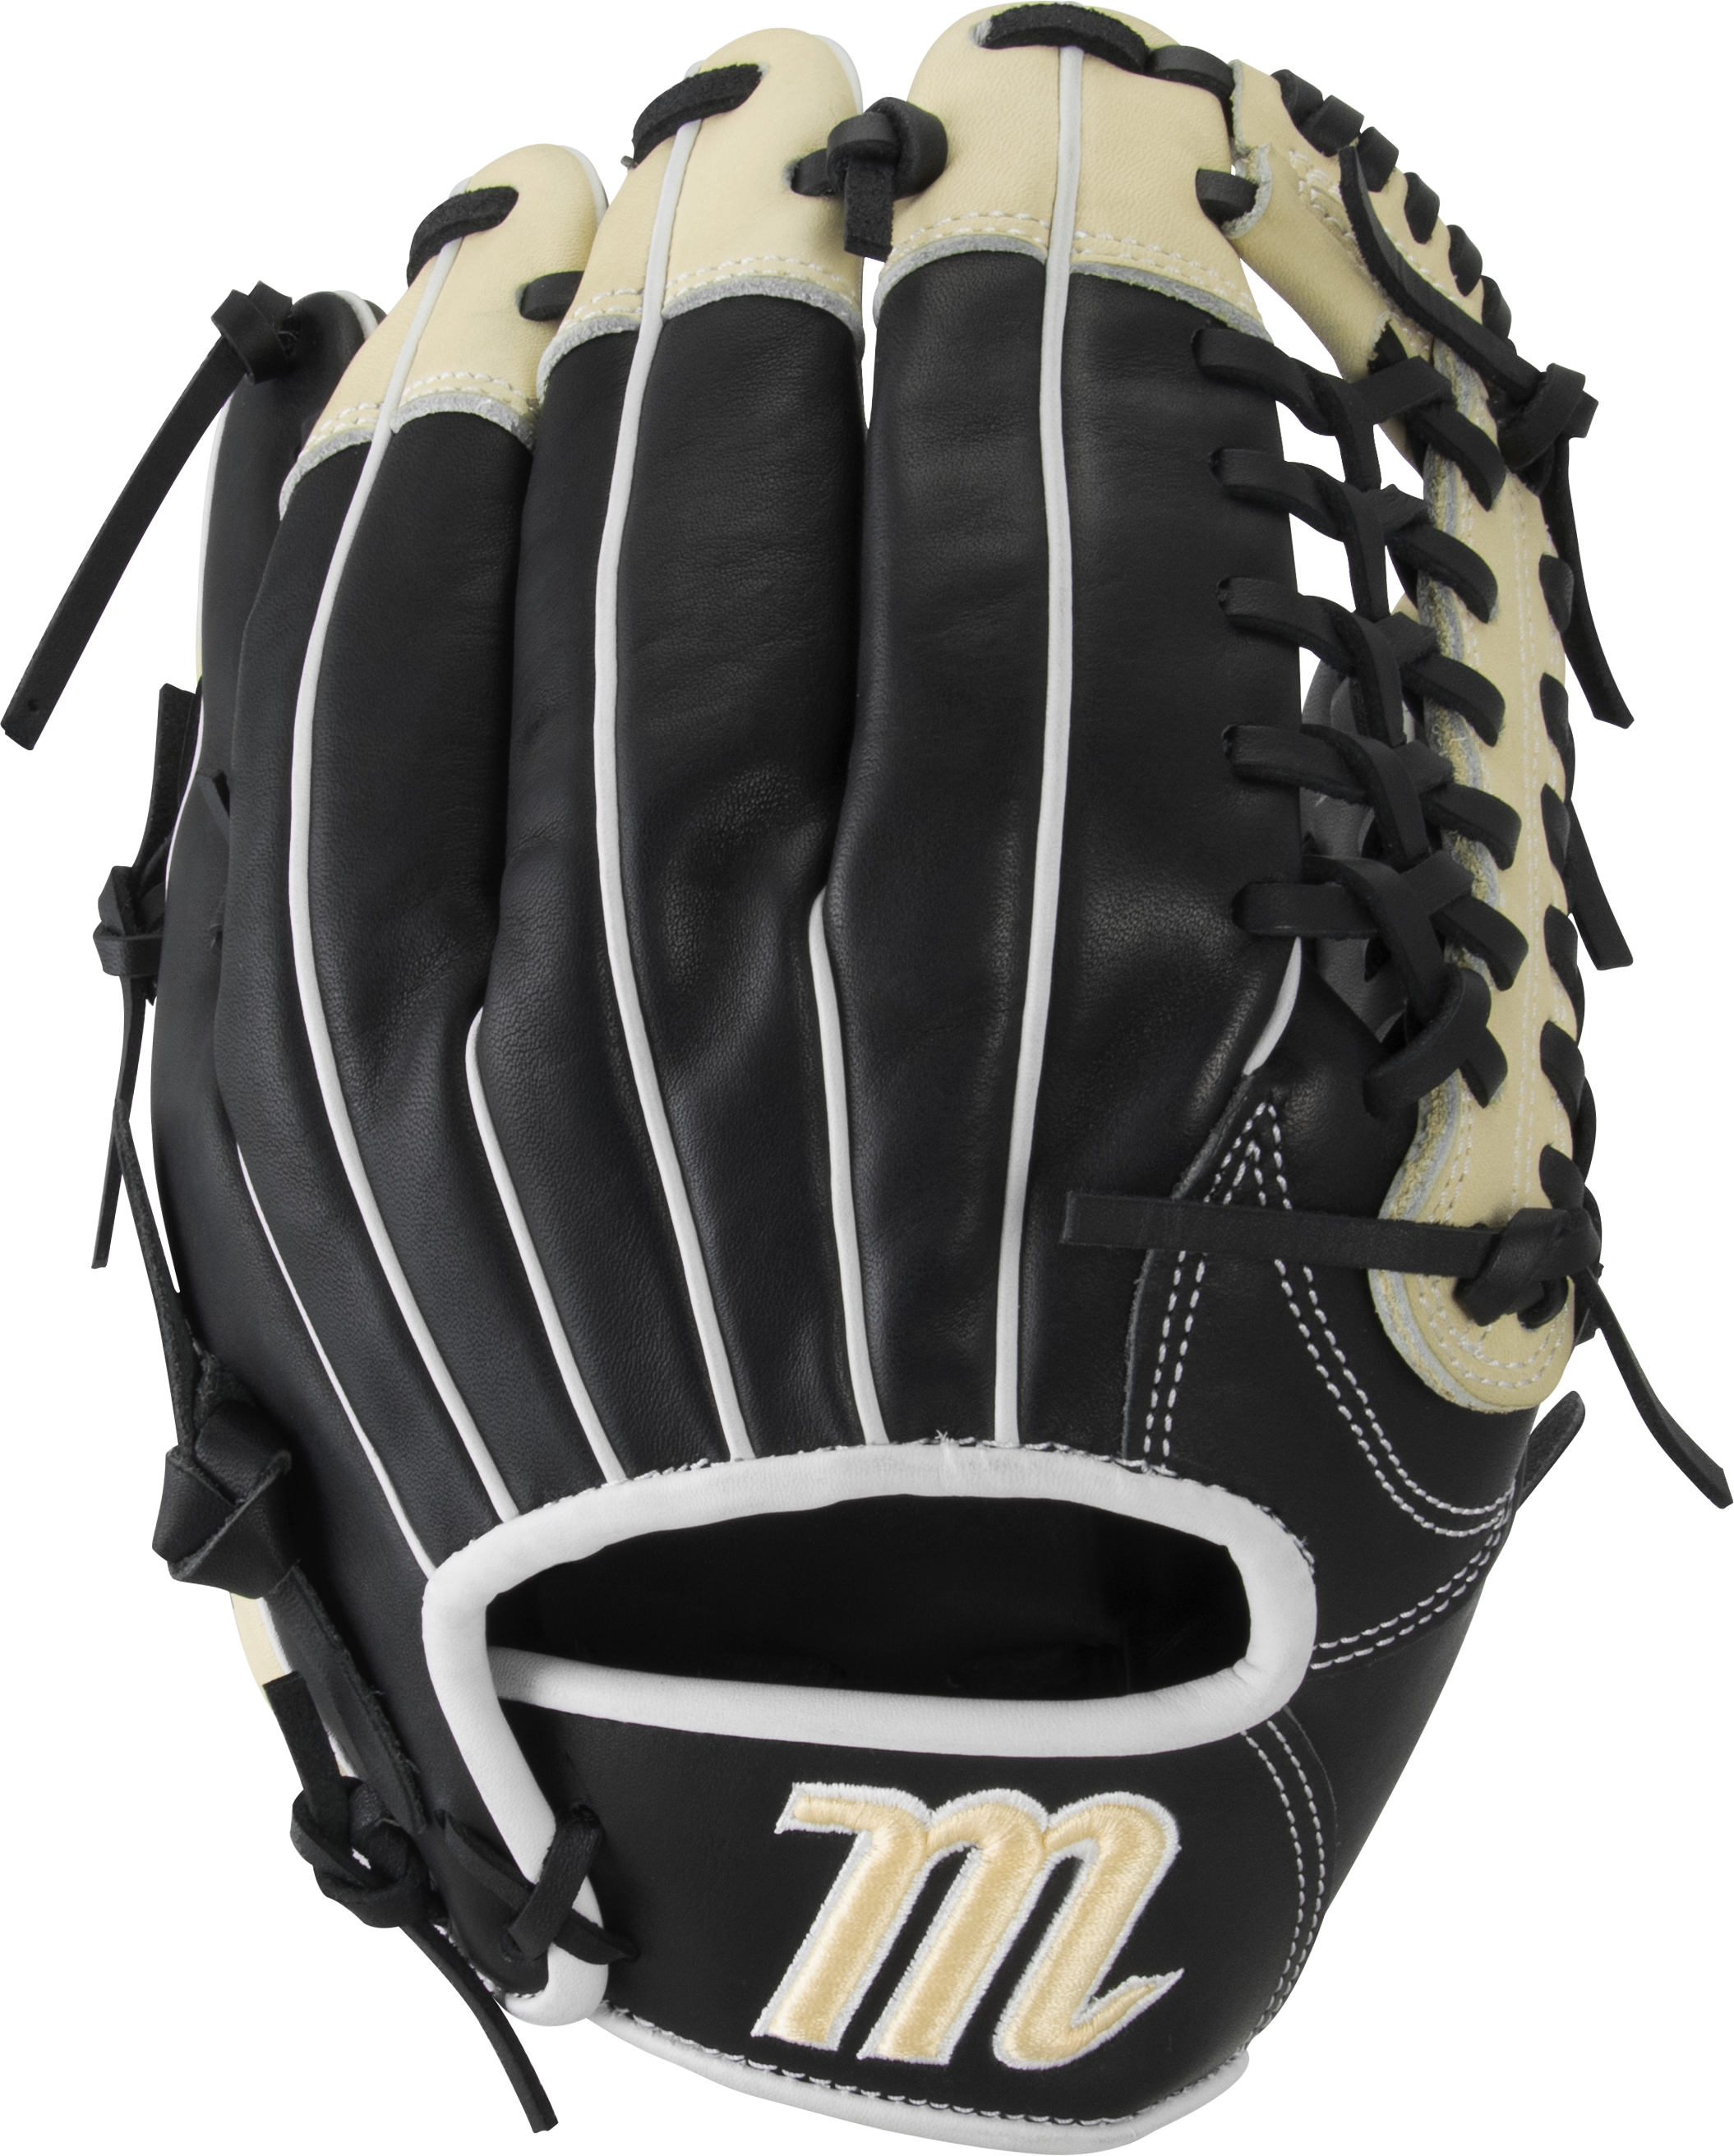 Tight-grain steerhide shell leather and palm lining increases durability while reducing weight Cushioned leather finger lining provides superior comfort and fielding security Reinforced finger tops protect against fielding abrasion and increase structural longevity Narrow-fit hand opening and scaled-down pro patterns provide exceptional fit and control Professional-grade USA rawhide laces from Tennessee Tanning Co. Lightweight design breaks in quickly and keeps its shape.